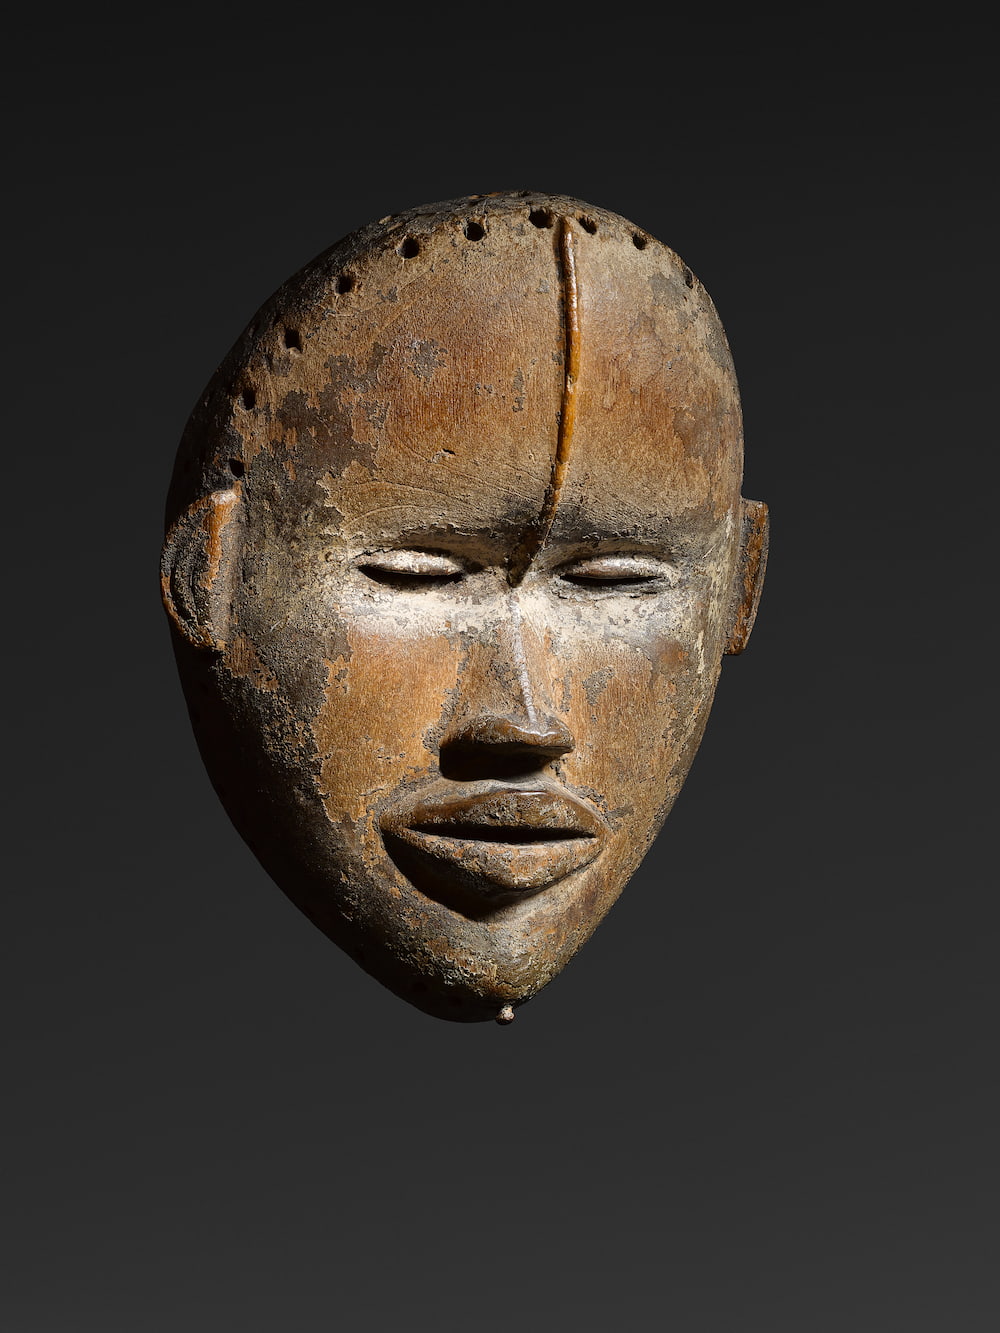 Dan Mask, Northern regions of Republic of Ivory Coast or Liberia, Estimated date: 19th century – early 20th century. Wood, kaolin, traces of a thick old crusty patina. Height: 28 cm.